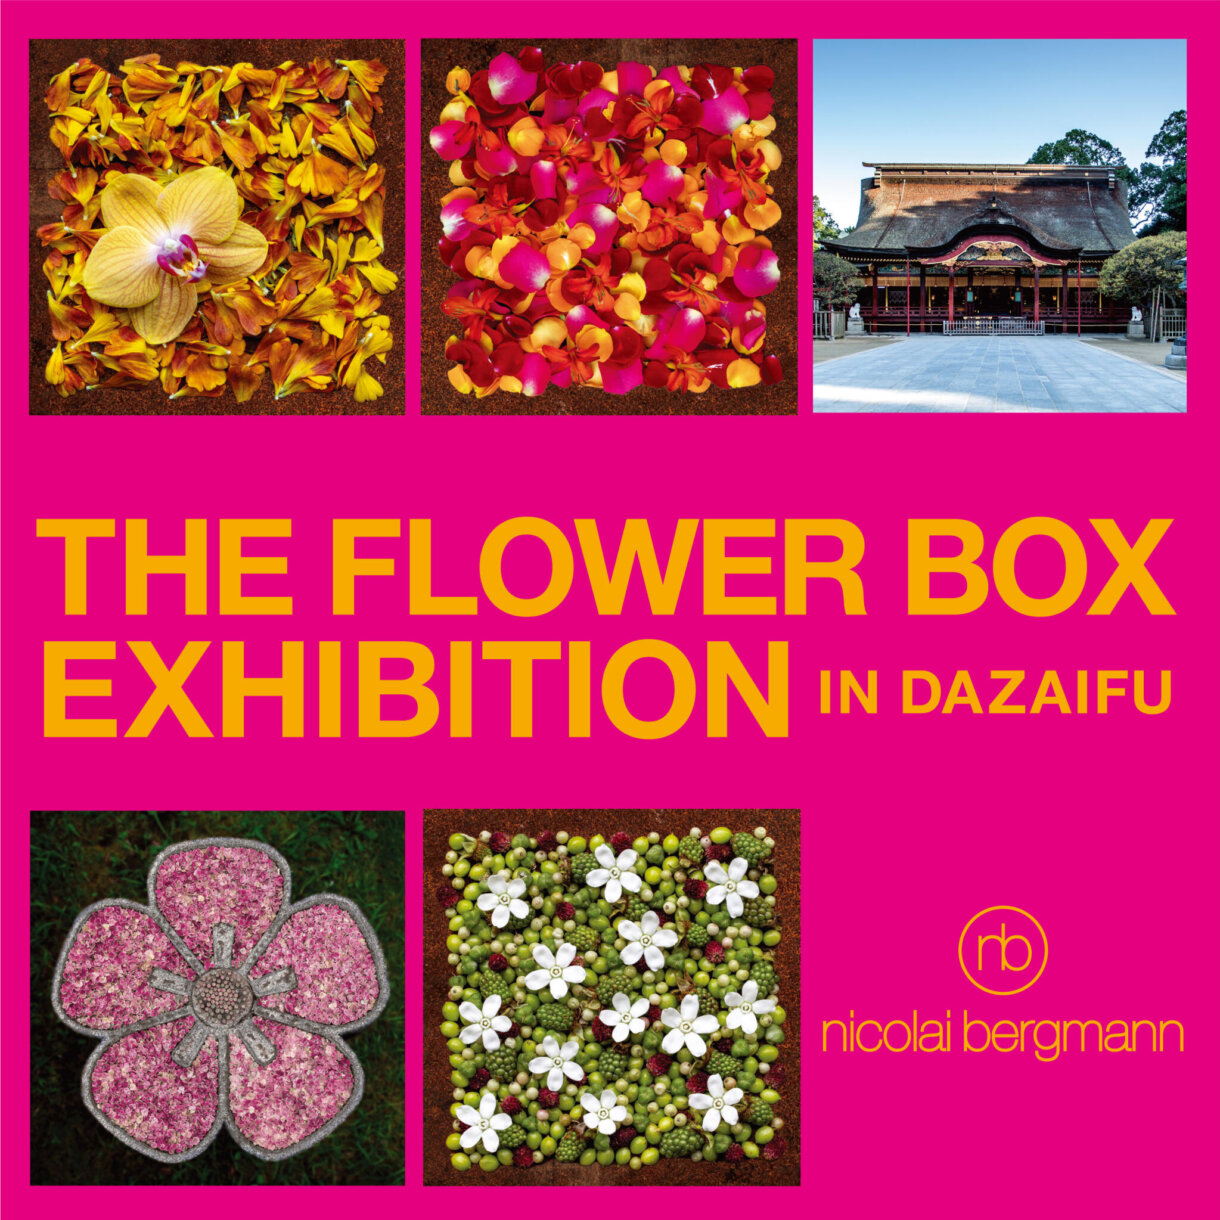 FUKUOKA: 【This event has ended】THE FLOWER BOX EXHIBITION IN DAZAIFU – The world of Floral Art that emerged from the Flower Box